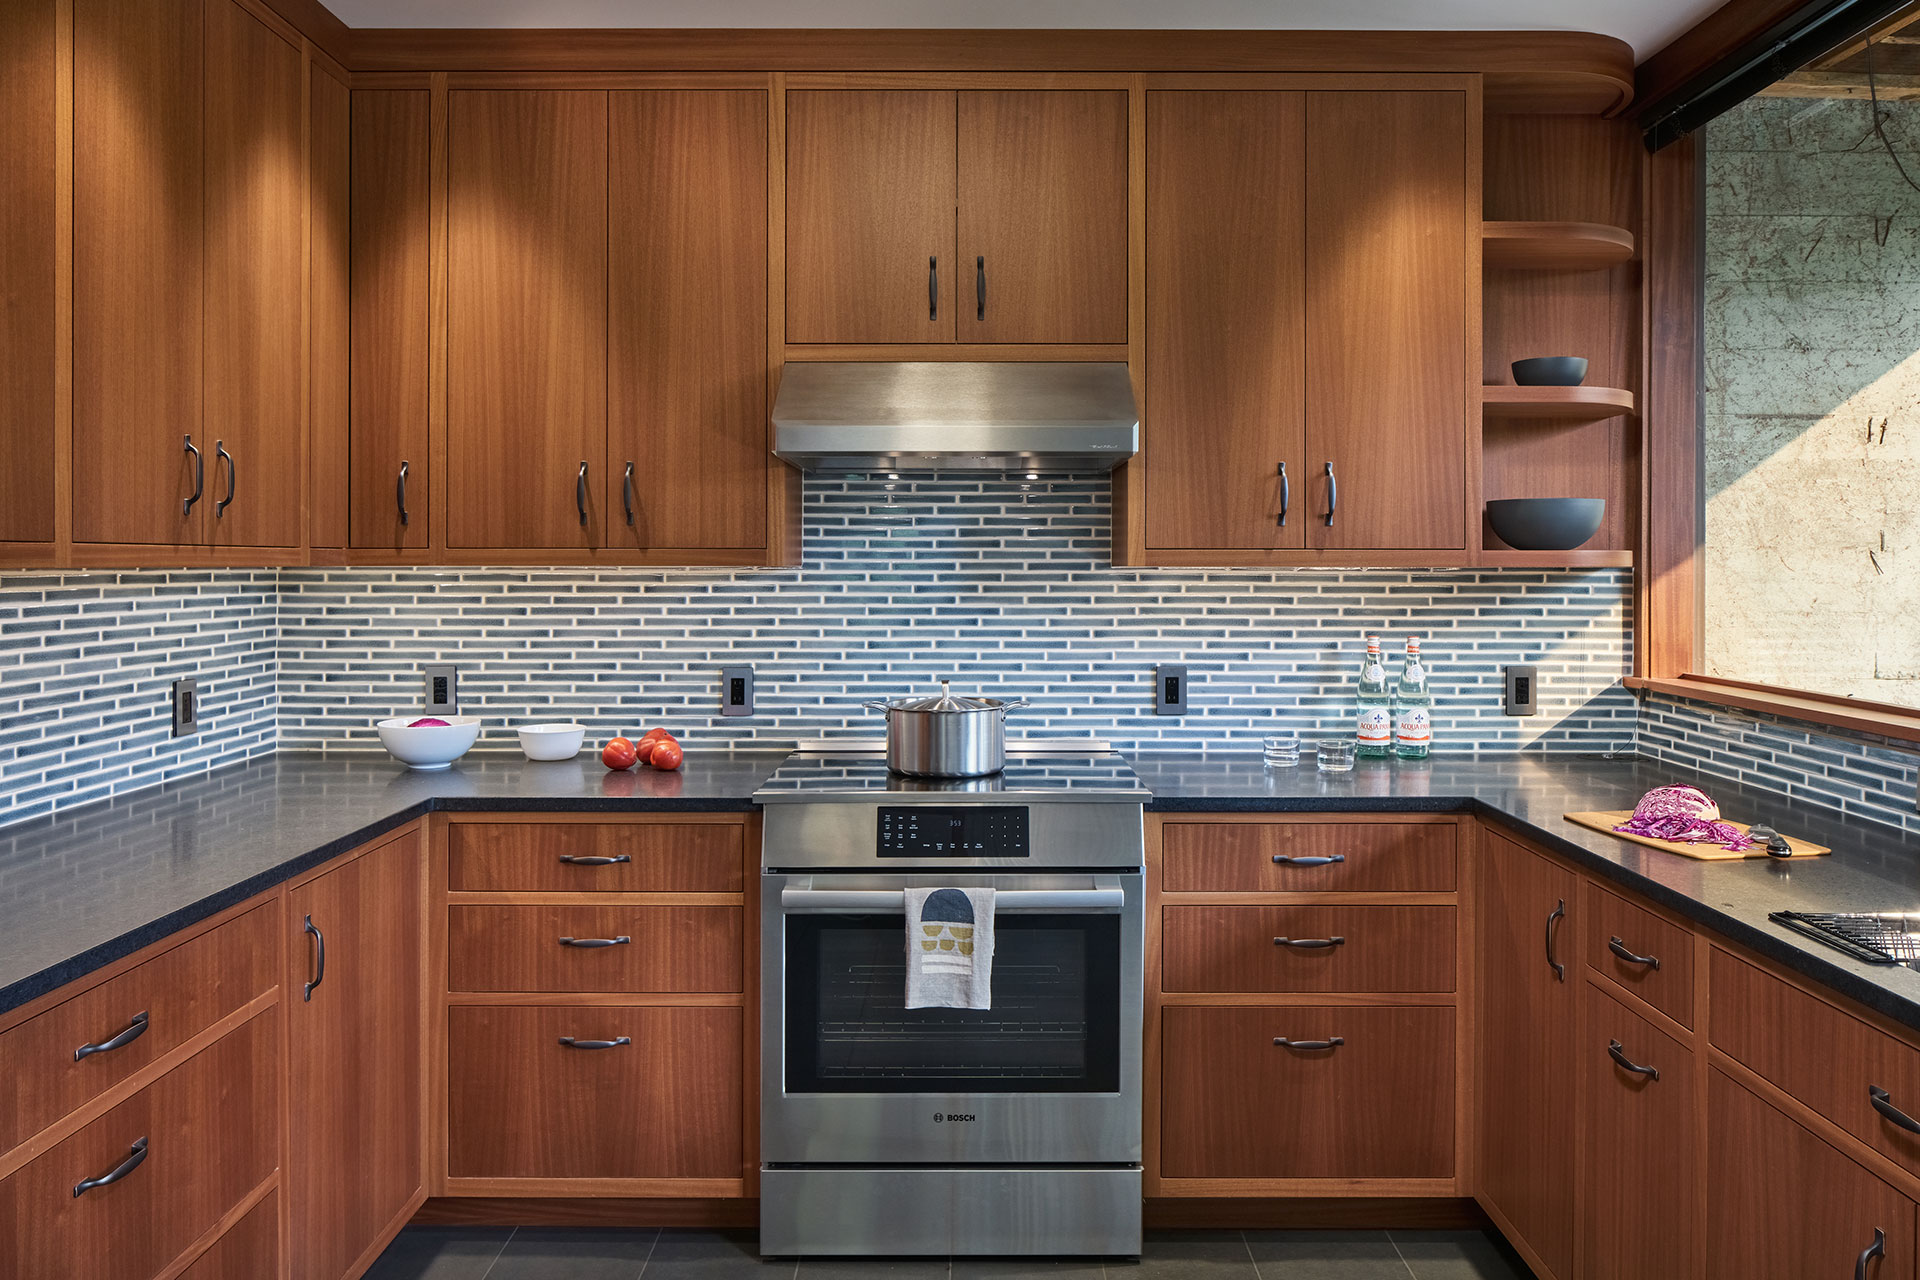 A new electric induction range and stainless steel hood are the focal points of the renovated kitchen.